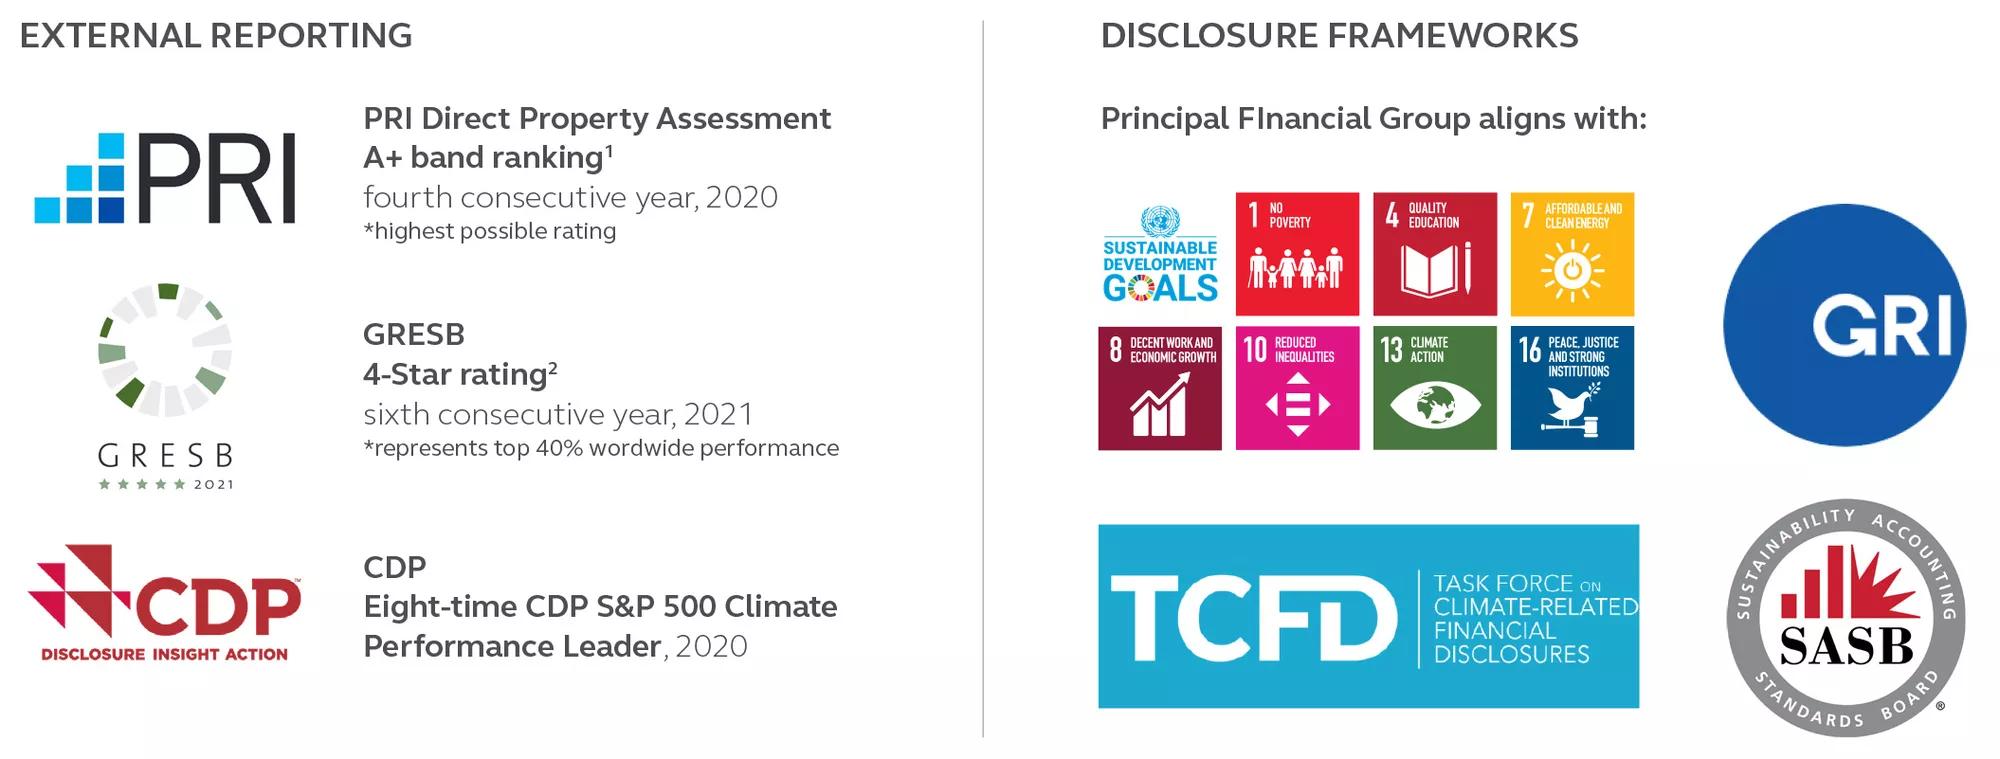 Graphic outlining Principal's external reporting and disclosure frameworks